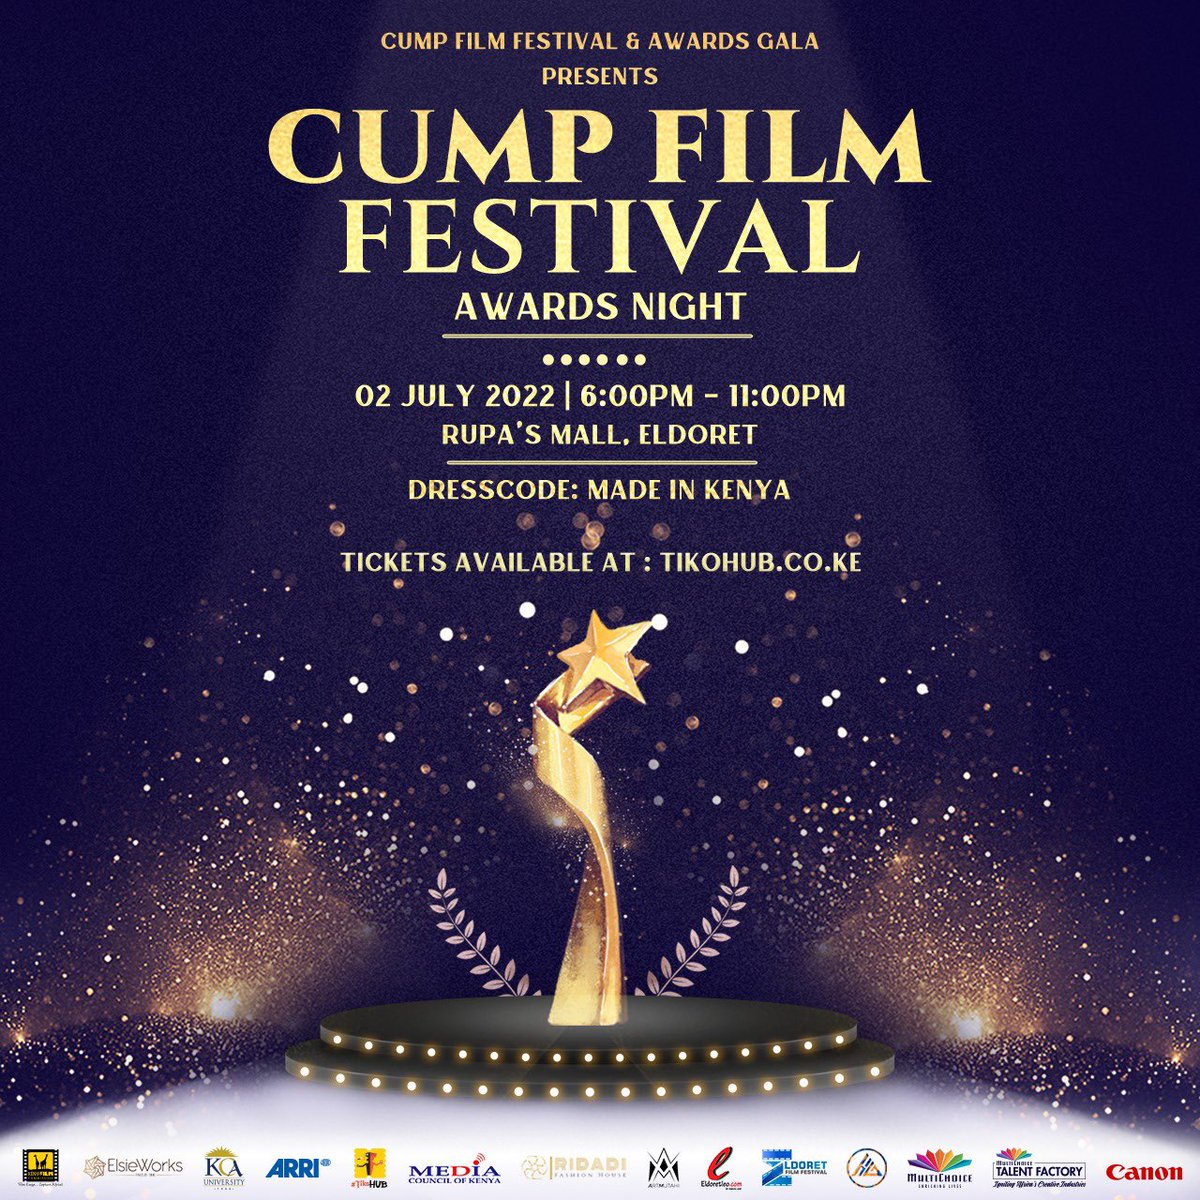 Are you ready for @CumpFestival Awards Gala Night on Saturday??? There will be lots of surprises and lots of awards!!!! Get your tickets from @tiko_hub #whatunitesus #TunaCuMPEldoret